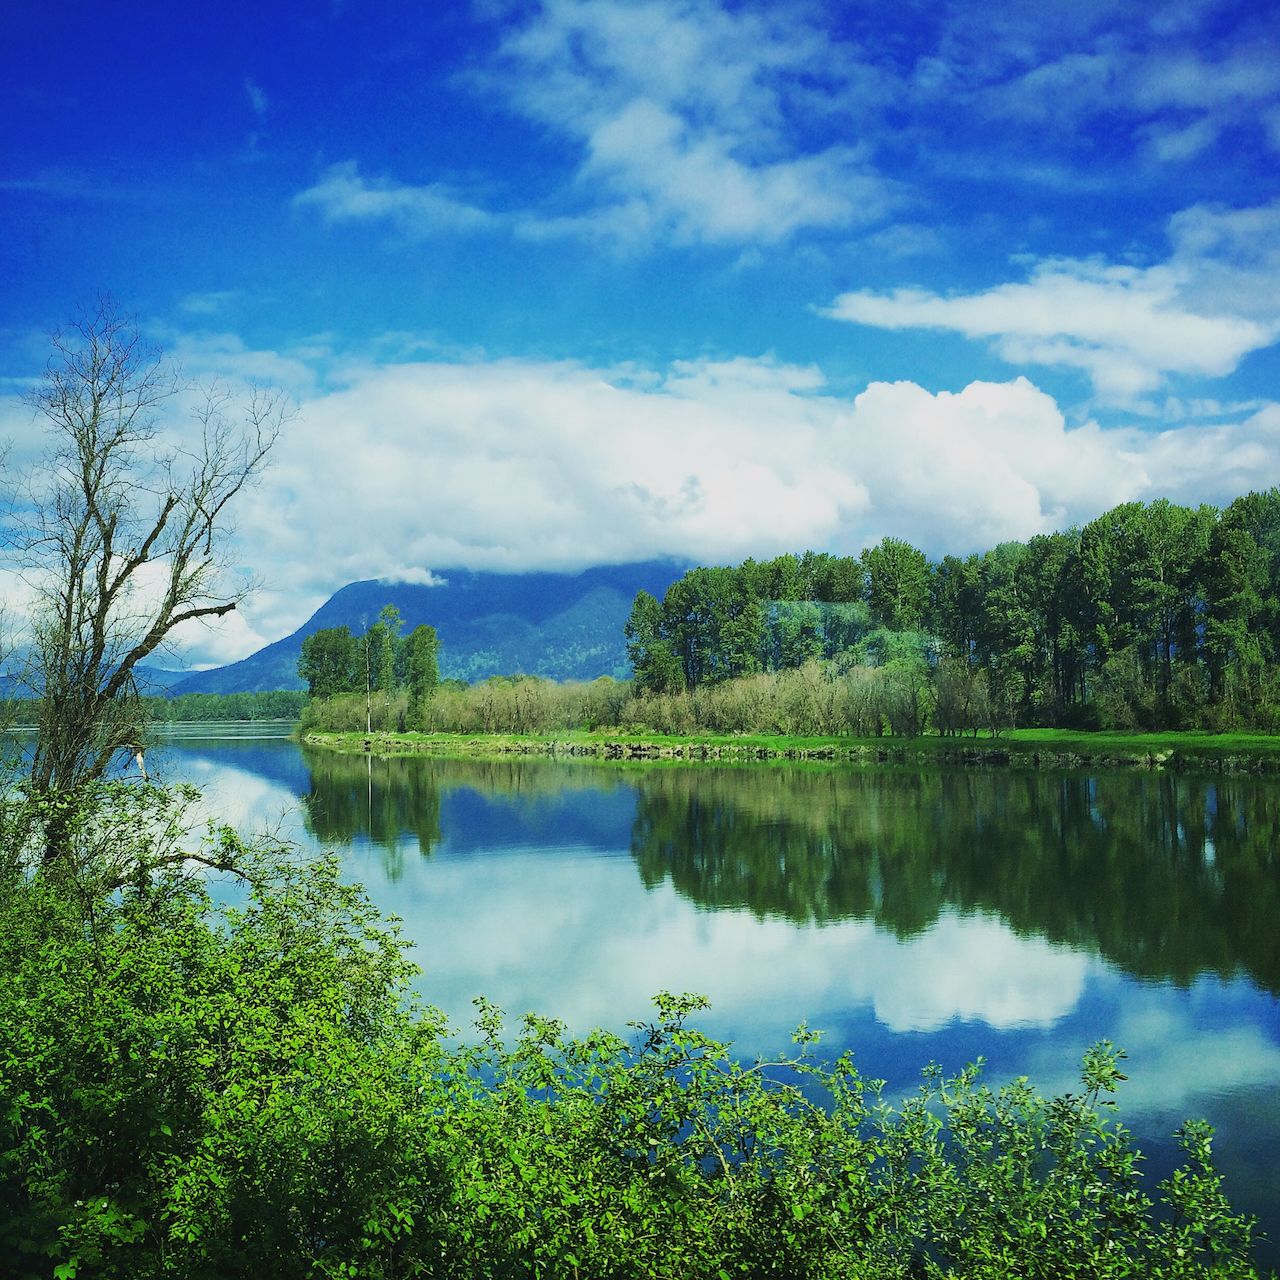 lake with green trees and mountains in the background, reflecting the blue sky and white clouds